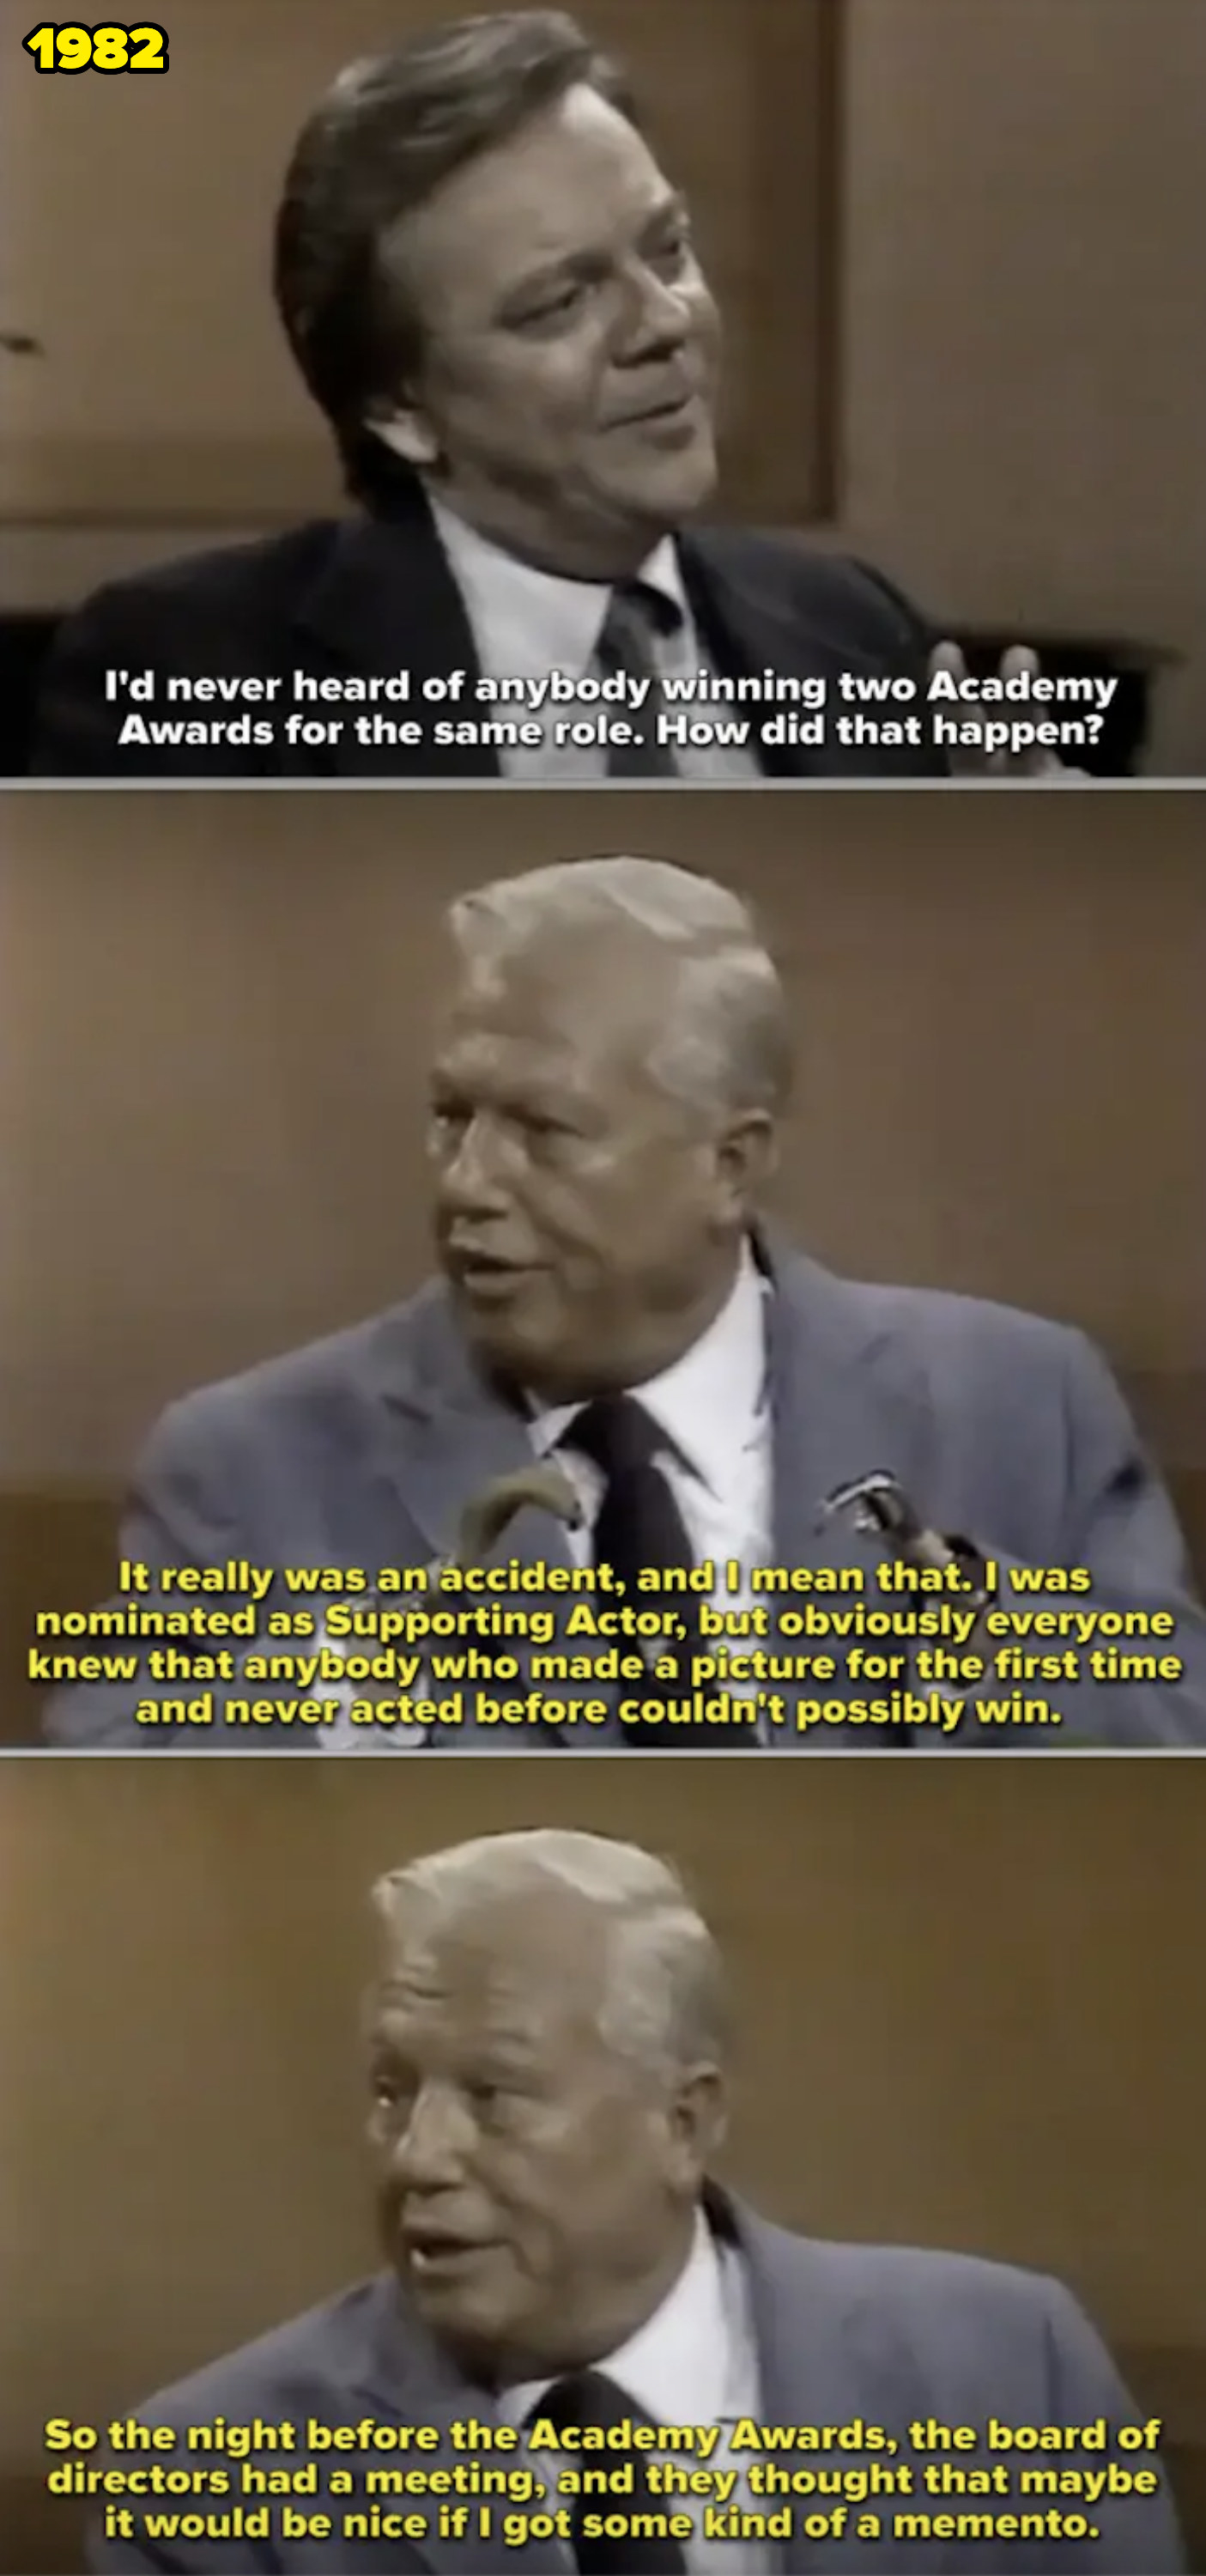 Harold Russell being interviewed on PBS&#x27;s &quot;Over Easy&quot; in 1982